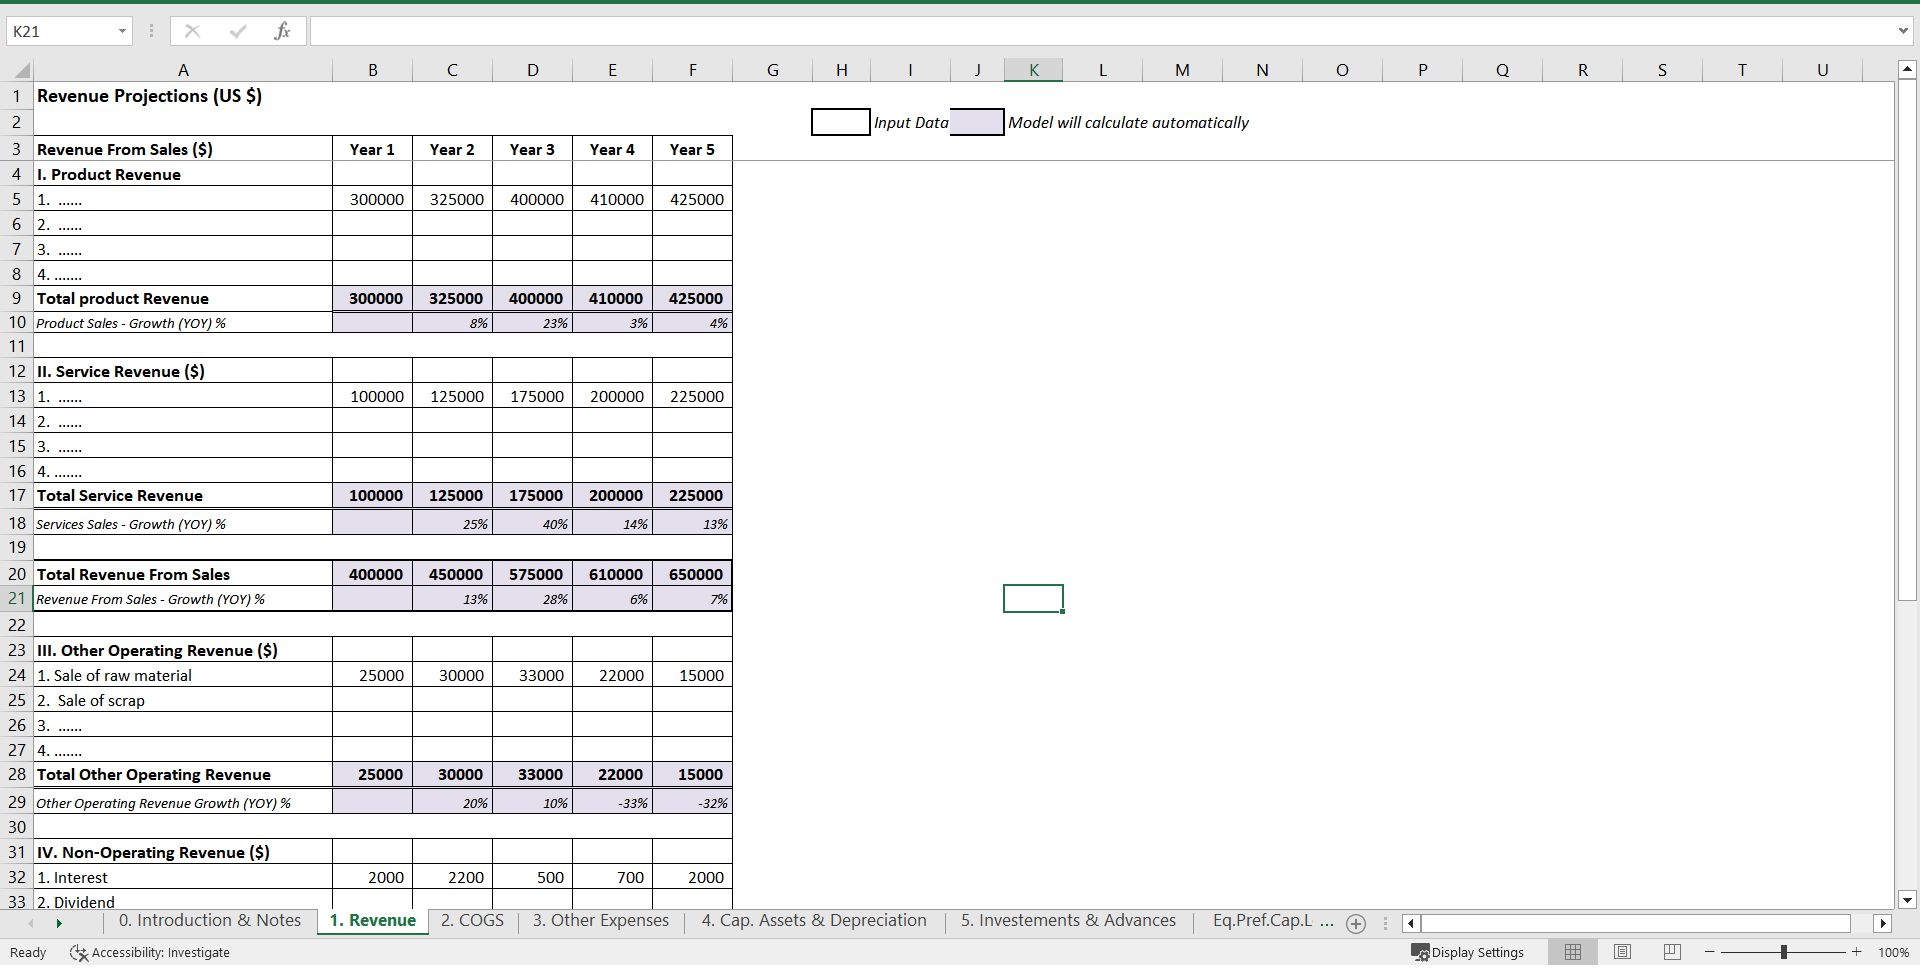 Integrated Financial Model - Auto Generate Projected Financial Statements (Excel template (XLSX)) Preview Image